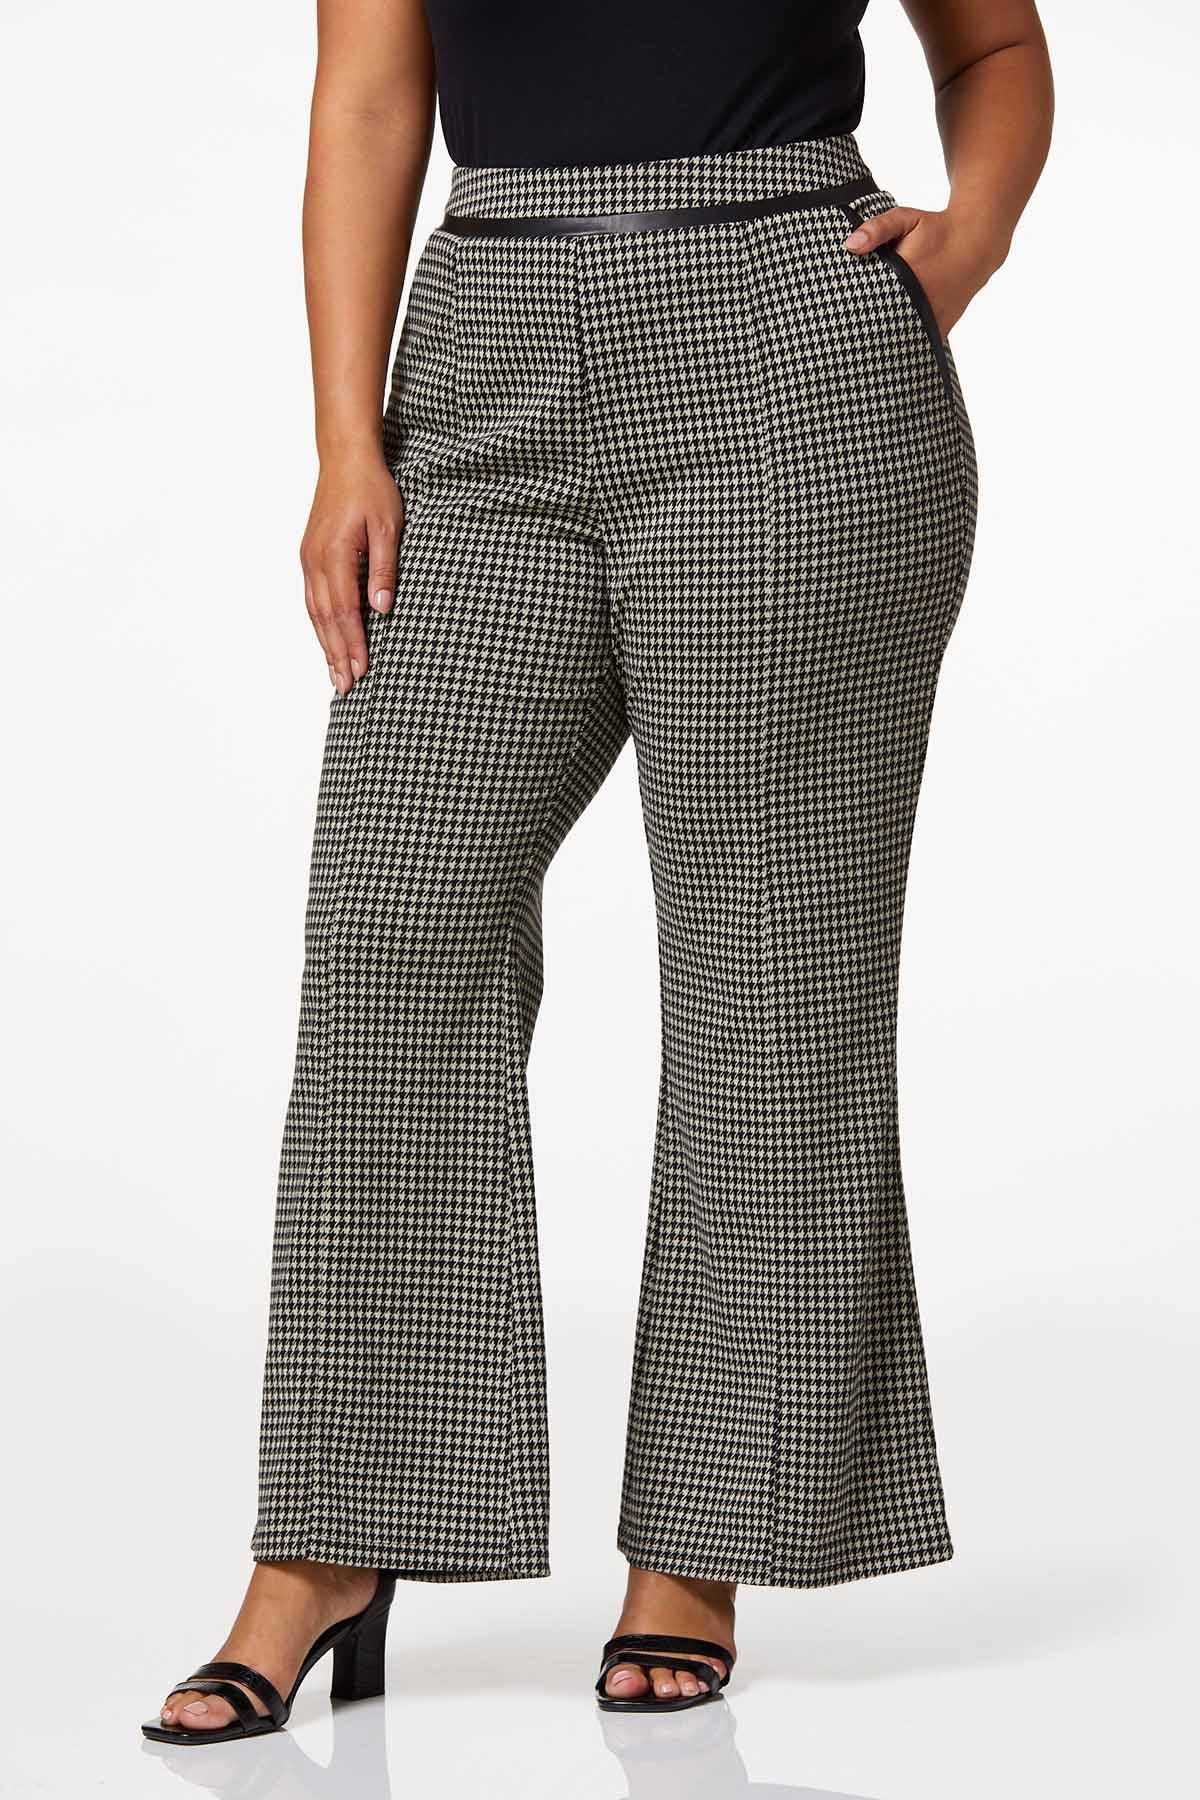 Cato Fashions  Cato Plus Size Houndstooth Faux Leather Trim Pants